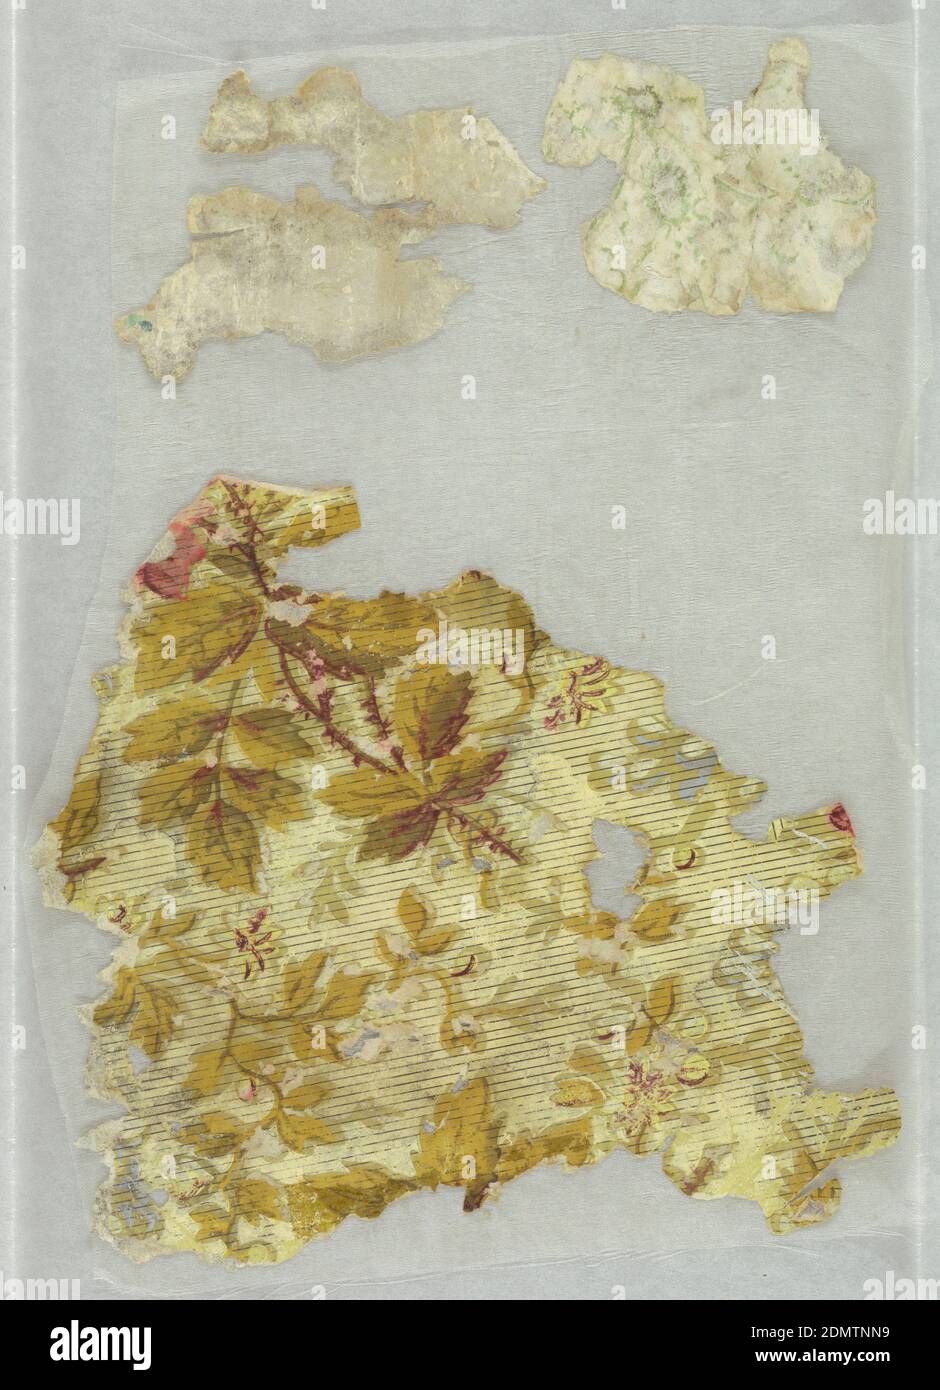 Sidewall, Machine-printed, Aesthetic-style design; floral and foliage pattern printed in ocher, deep red, yellow, blue and cream color on light olive-green ground. Overprinted with fine black stripes., 1860–90, Wallcoverings, Sidewall Stock Photo